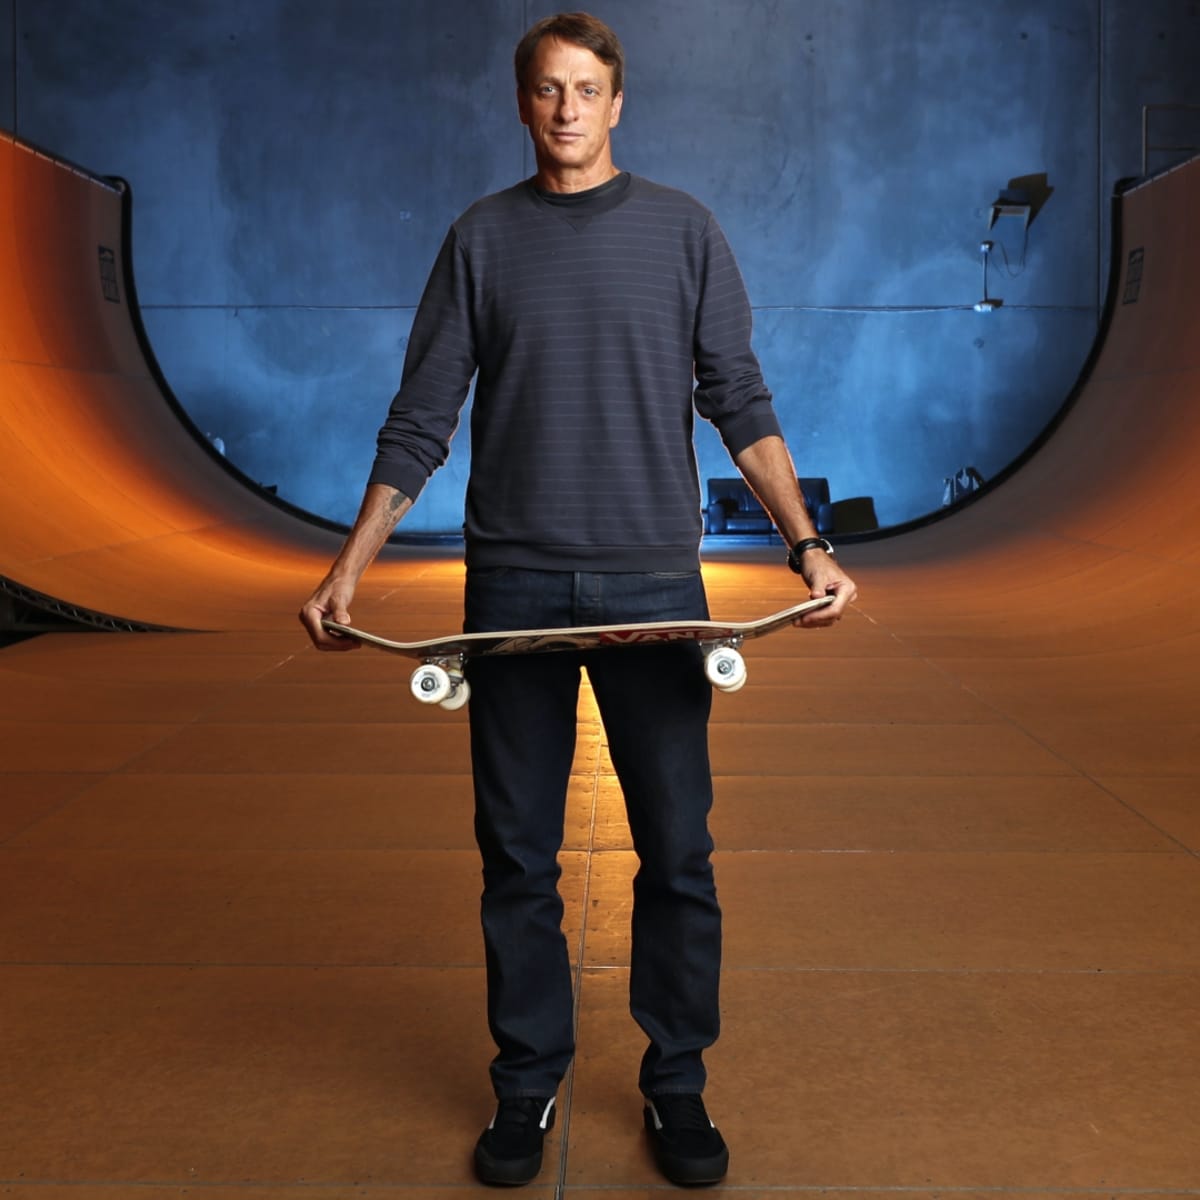 Tony Hawk on Olympic Skateboarding and Working With His Daughter